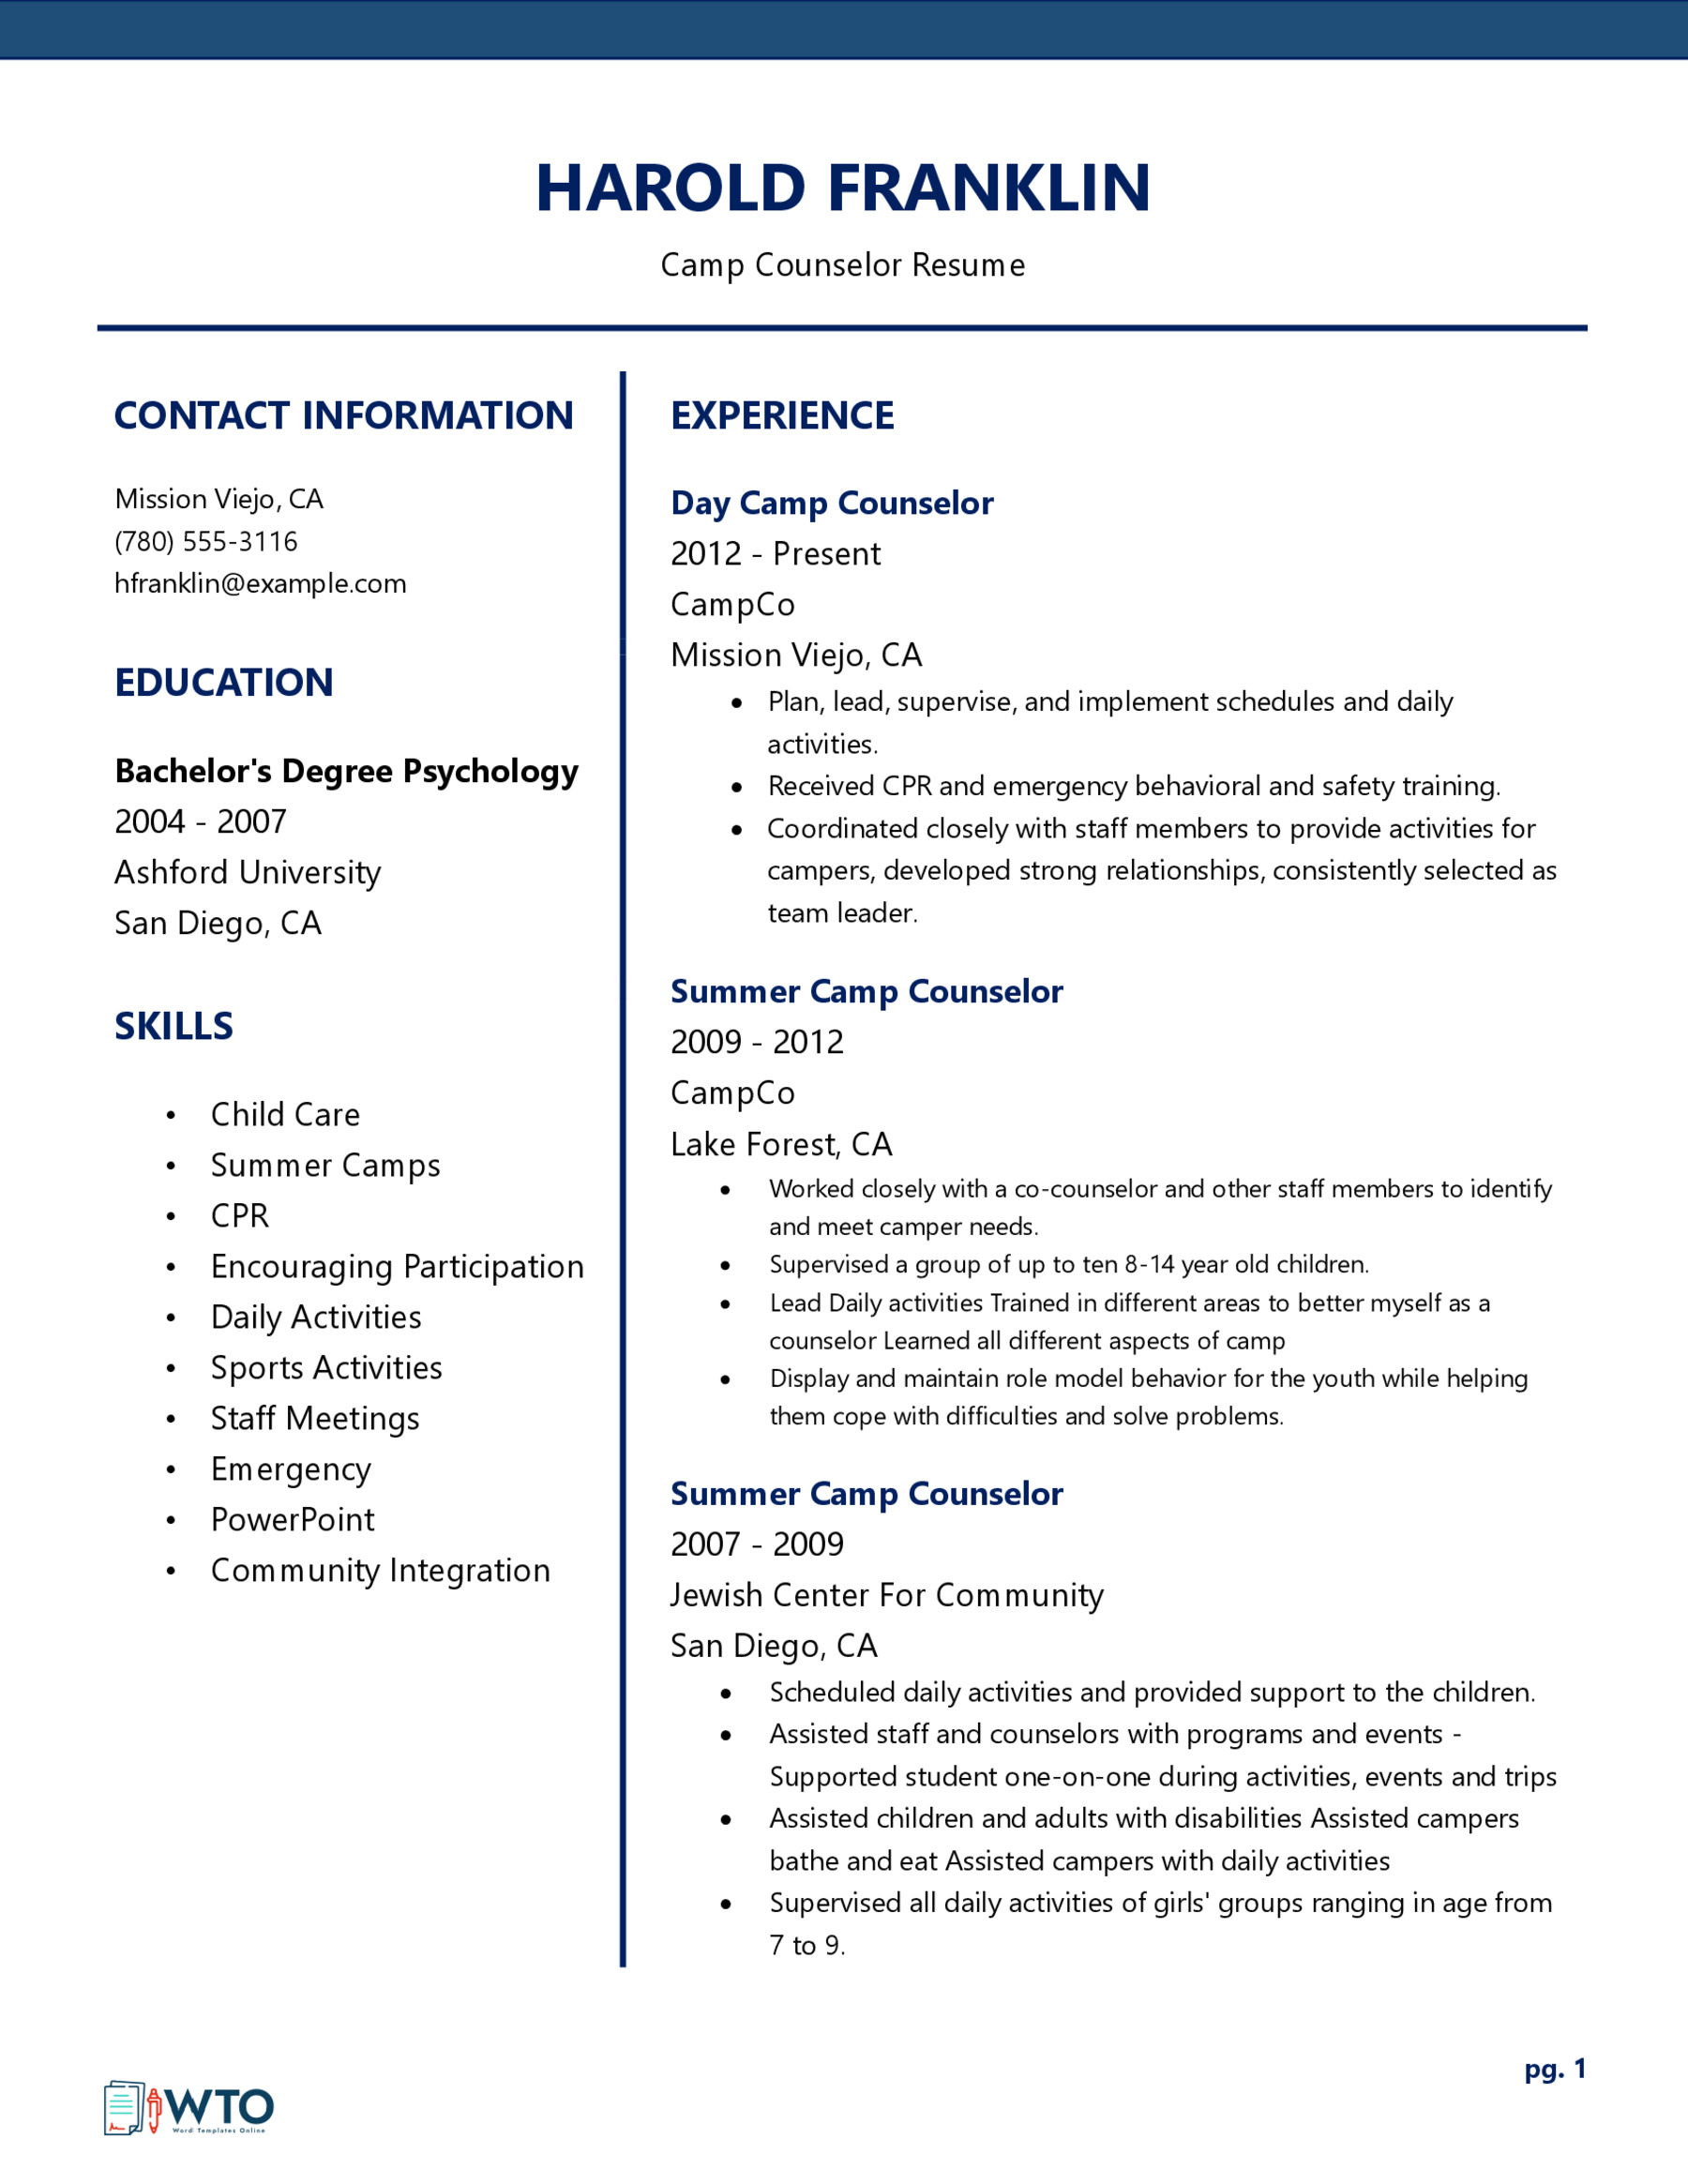 Camp Counselor Resume - Well-Structured Sample